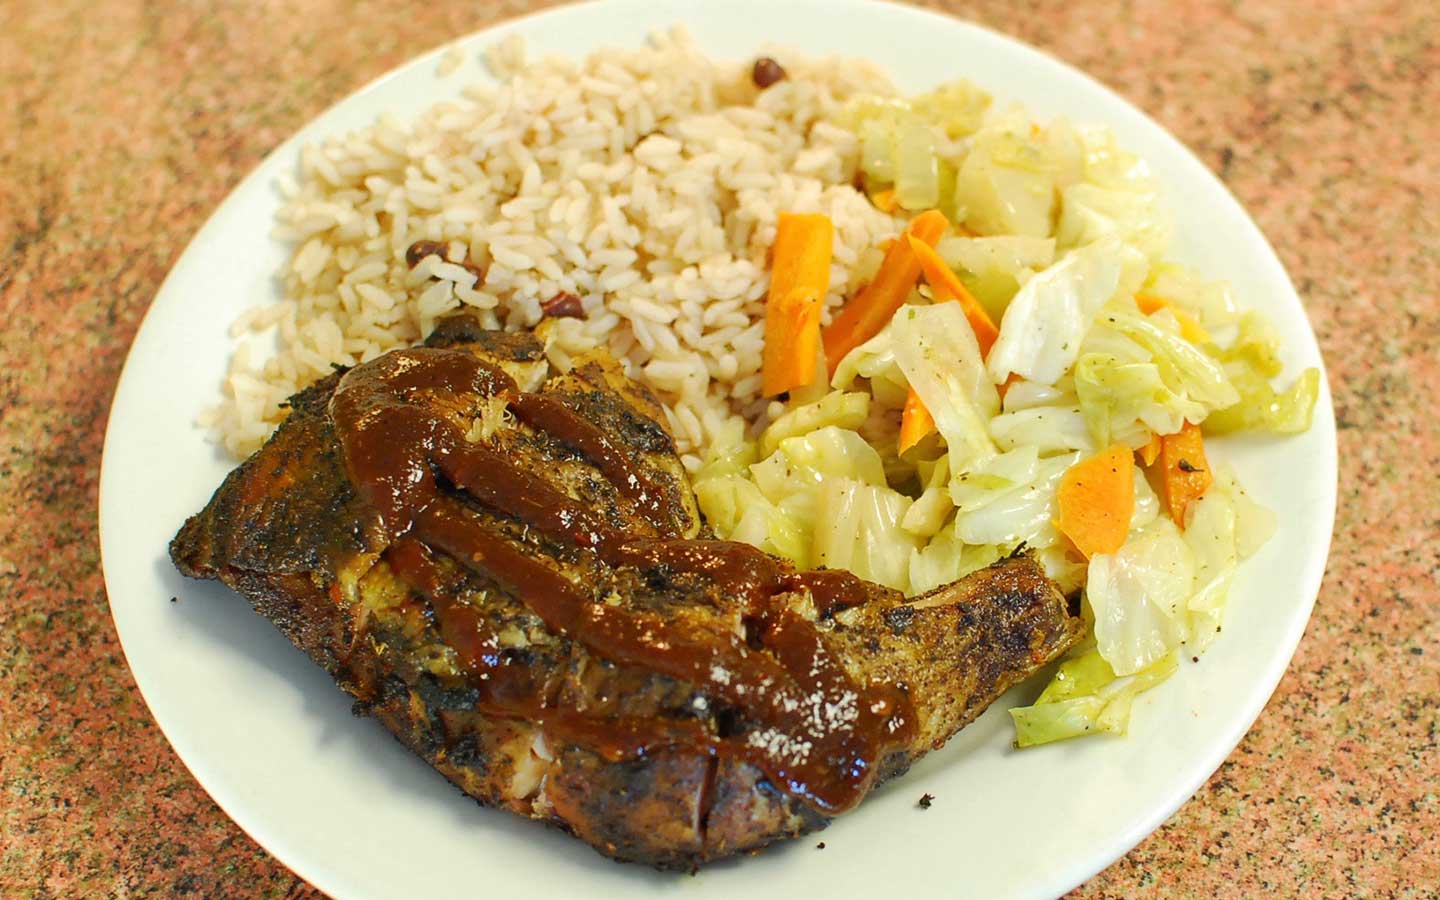 Don't miss the jerk chicken at Clive's Cafe